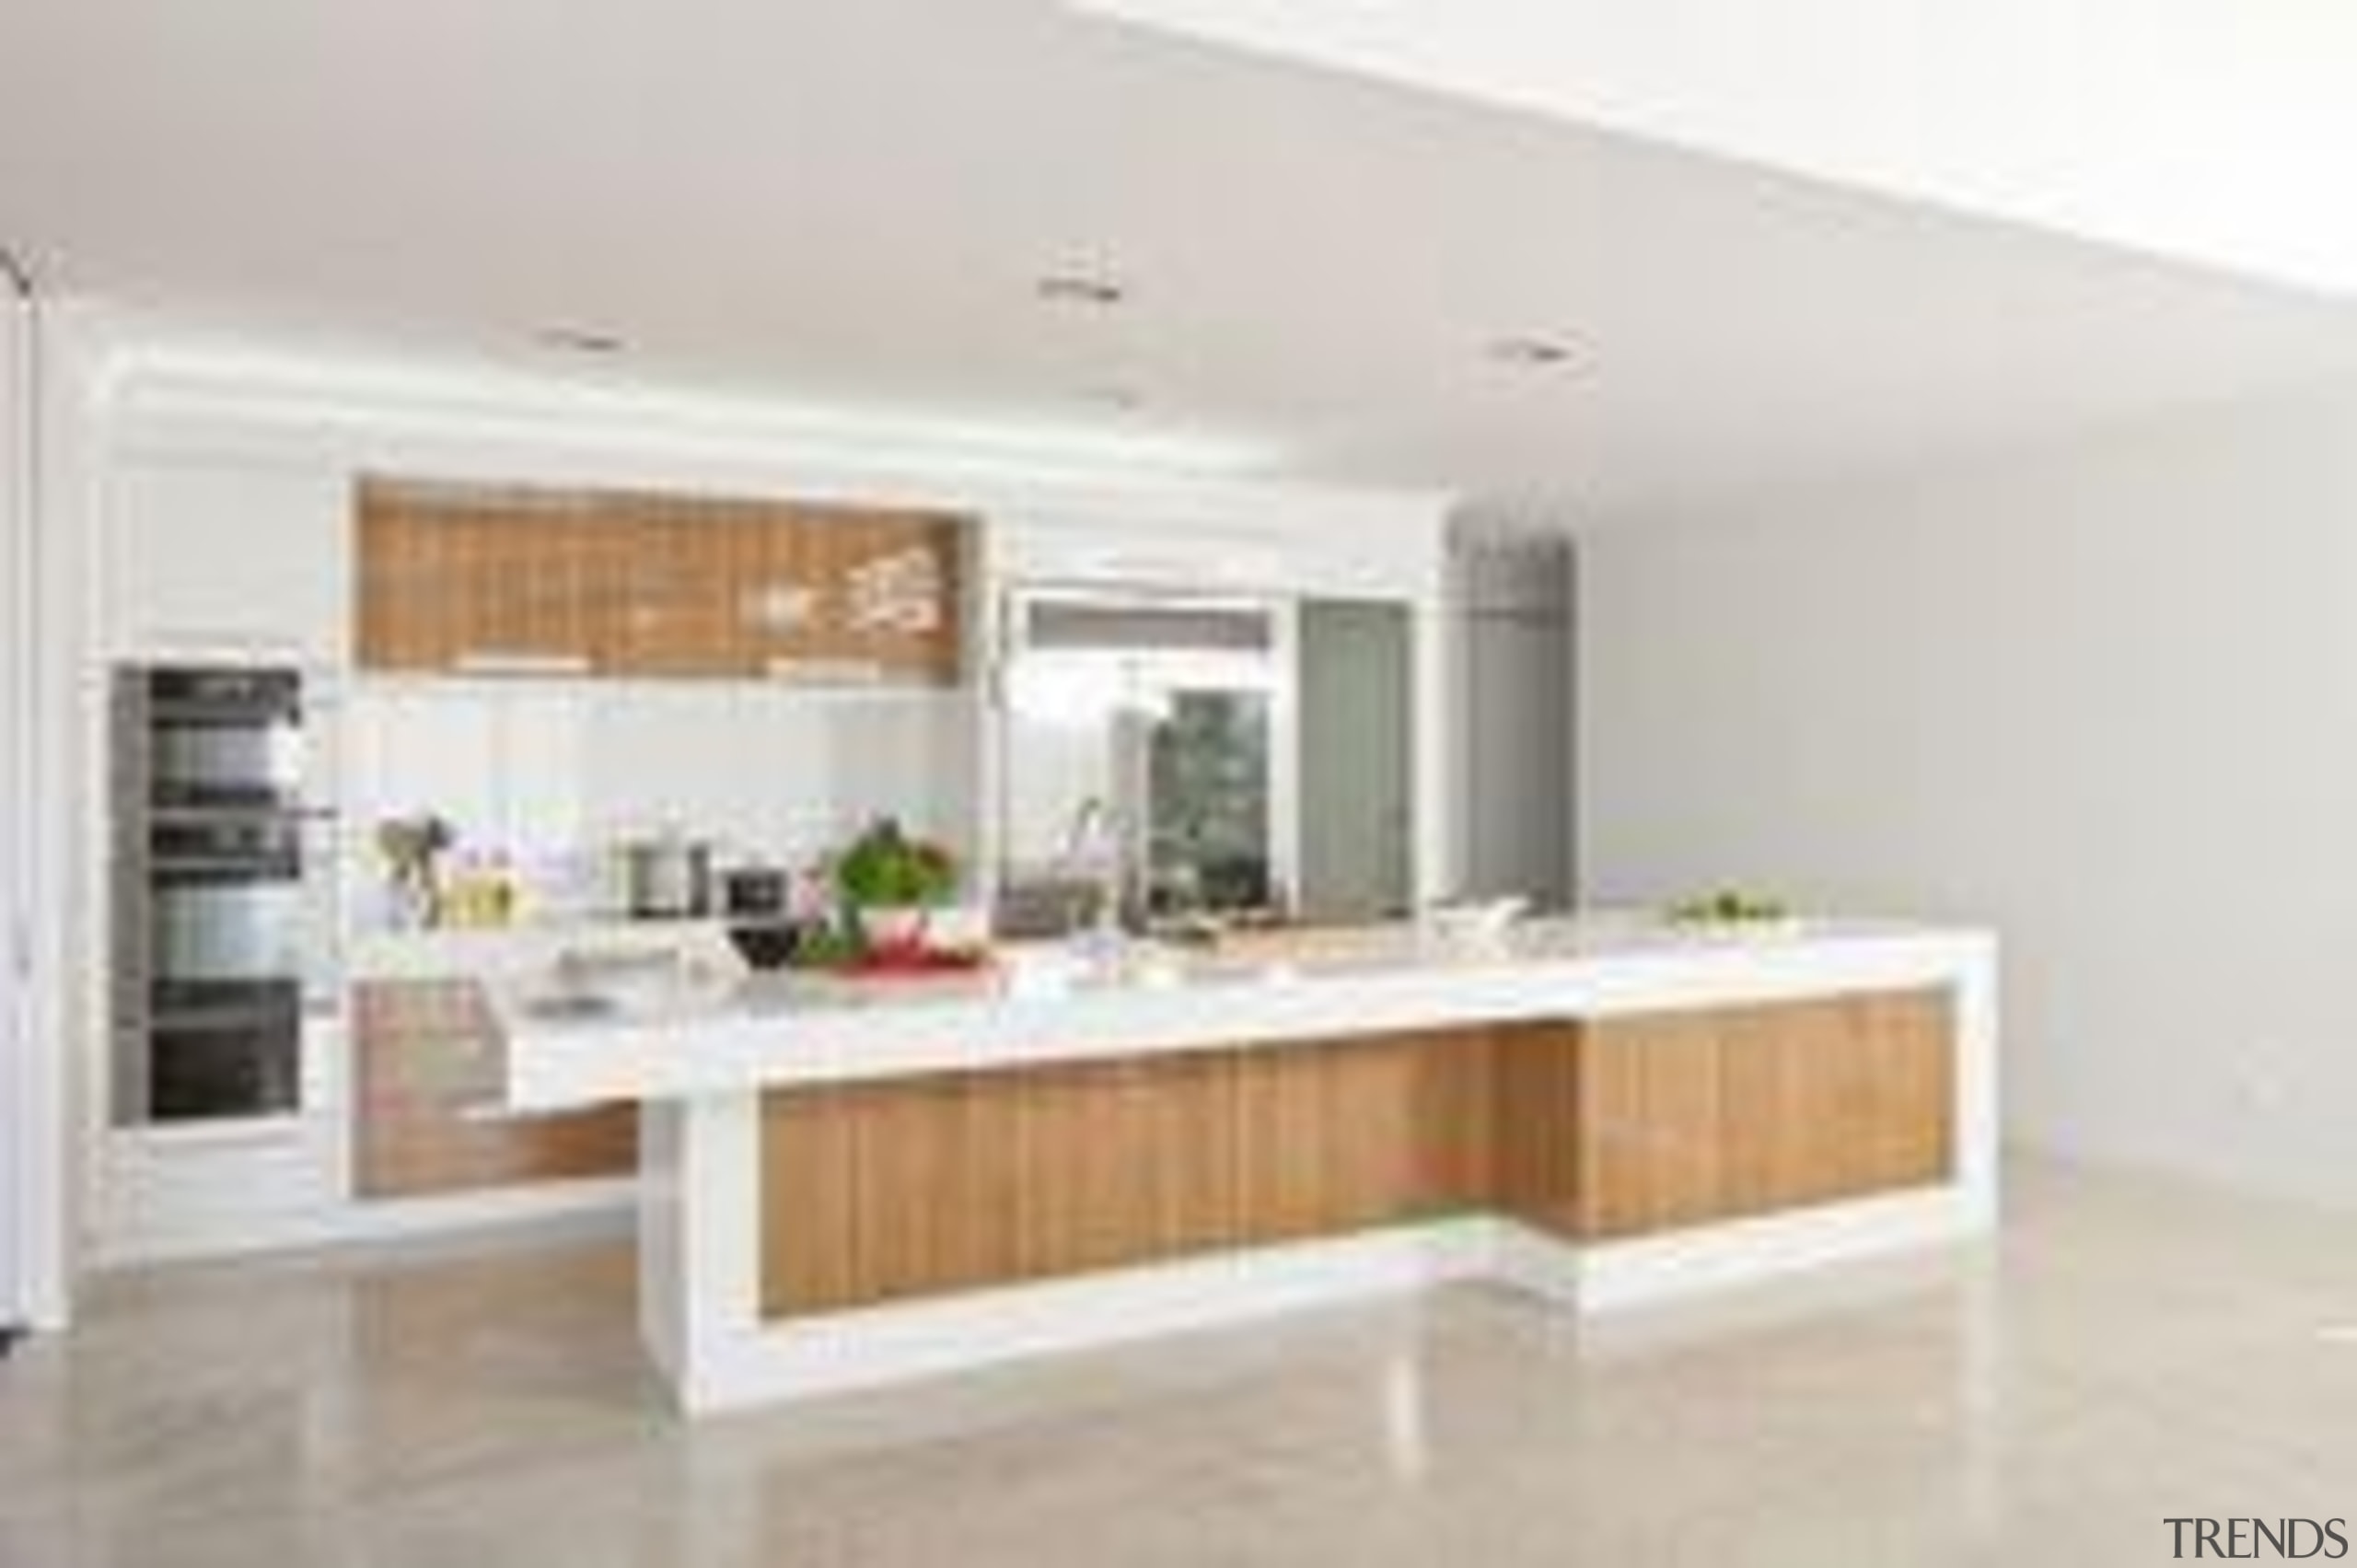 Laminex Timber Veneer in Zebrano was used to countertop, interior design, kitchen, property, real estate, white